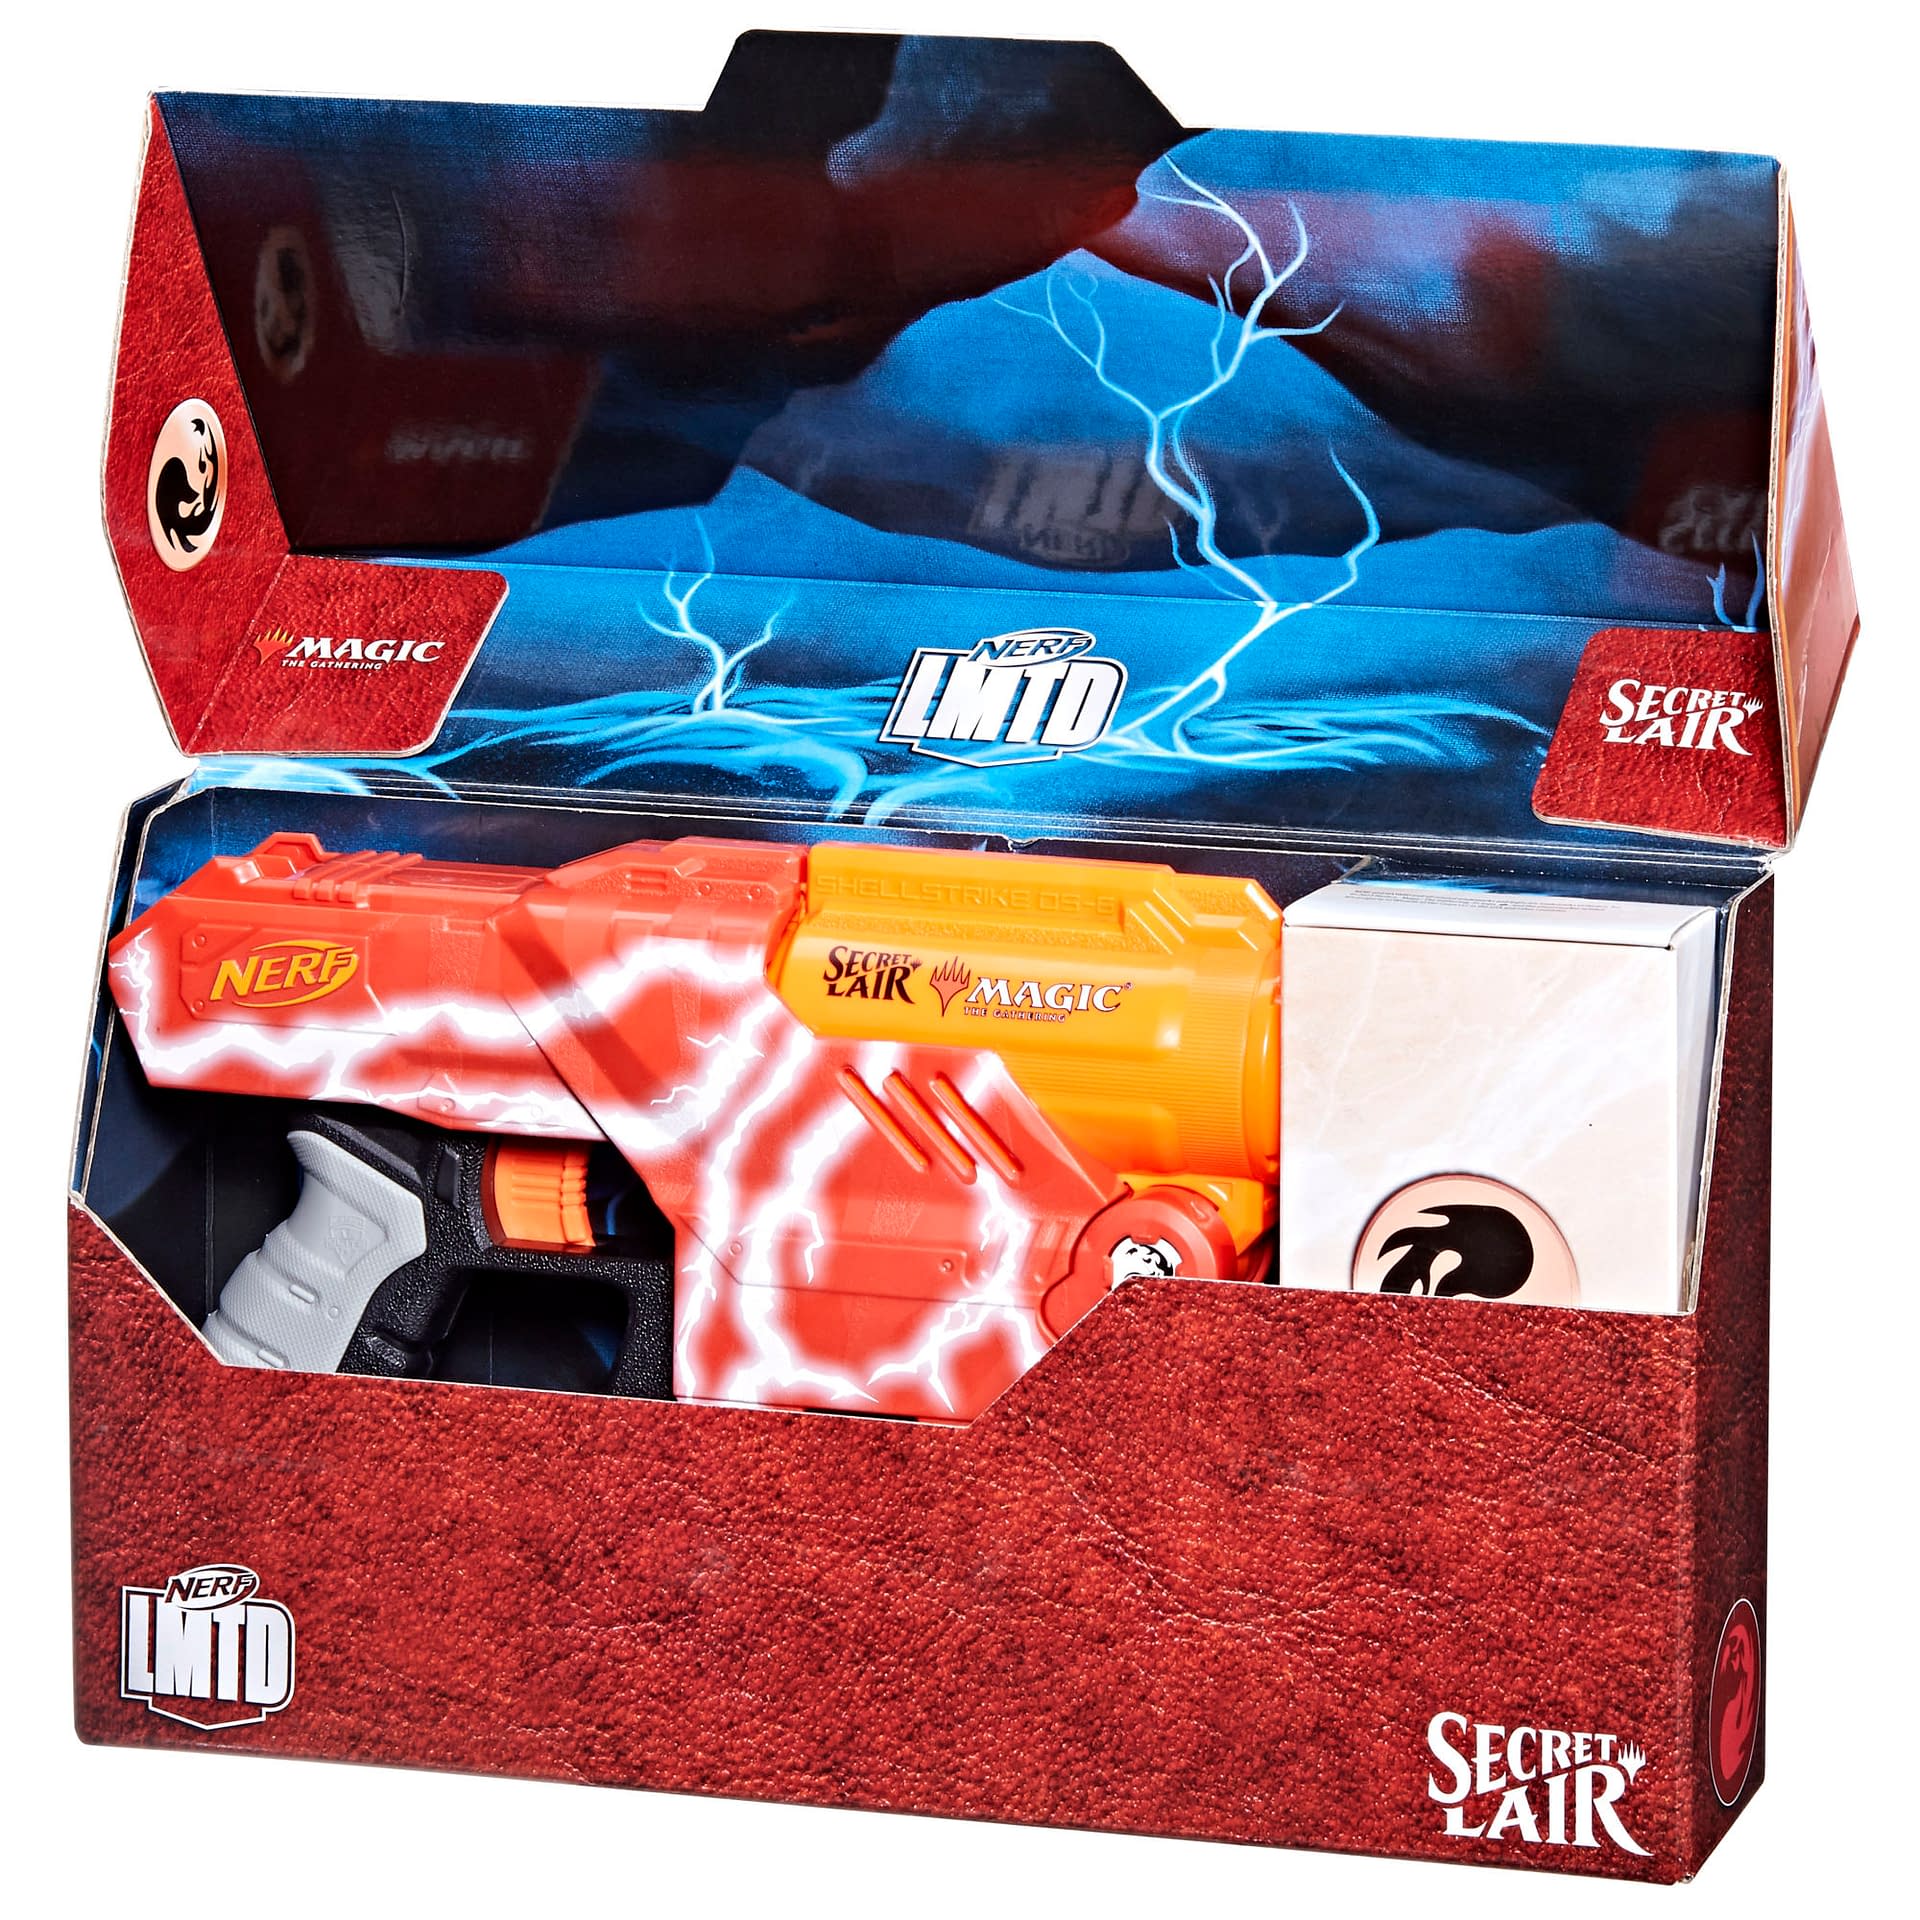 Cast Lightning with the New NERF x Magic: The Gathering Blaster